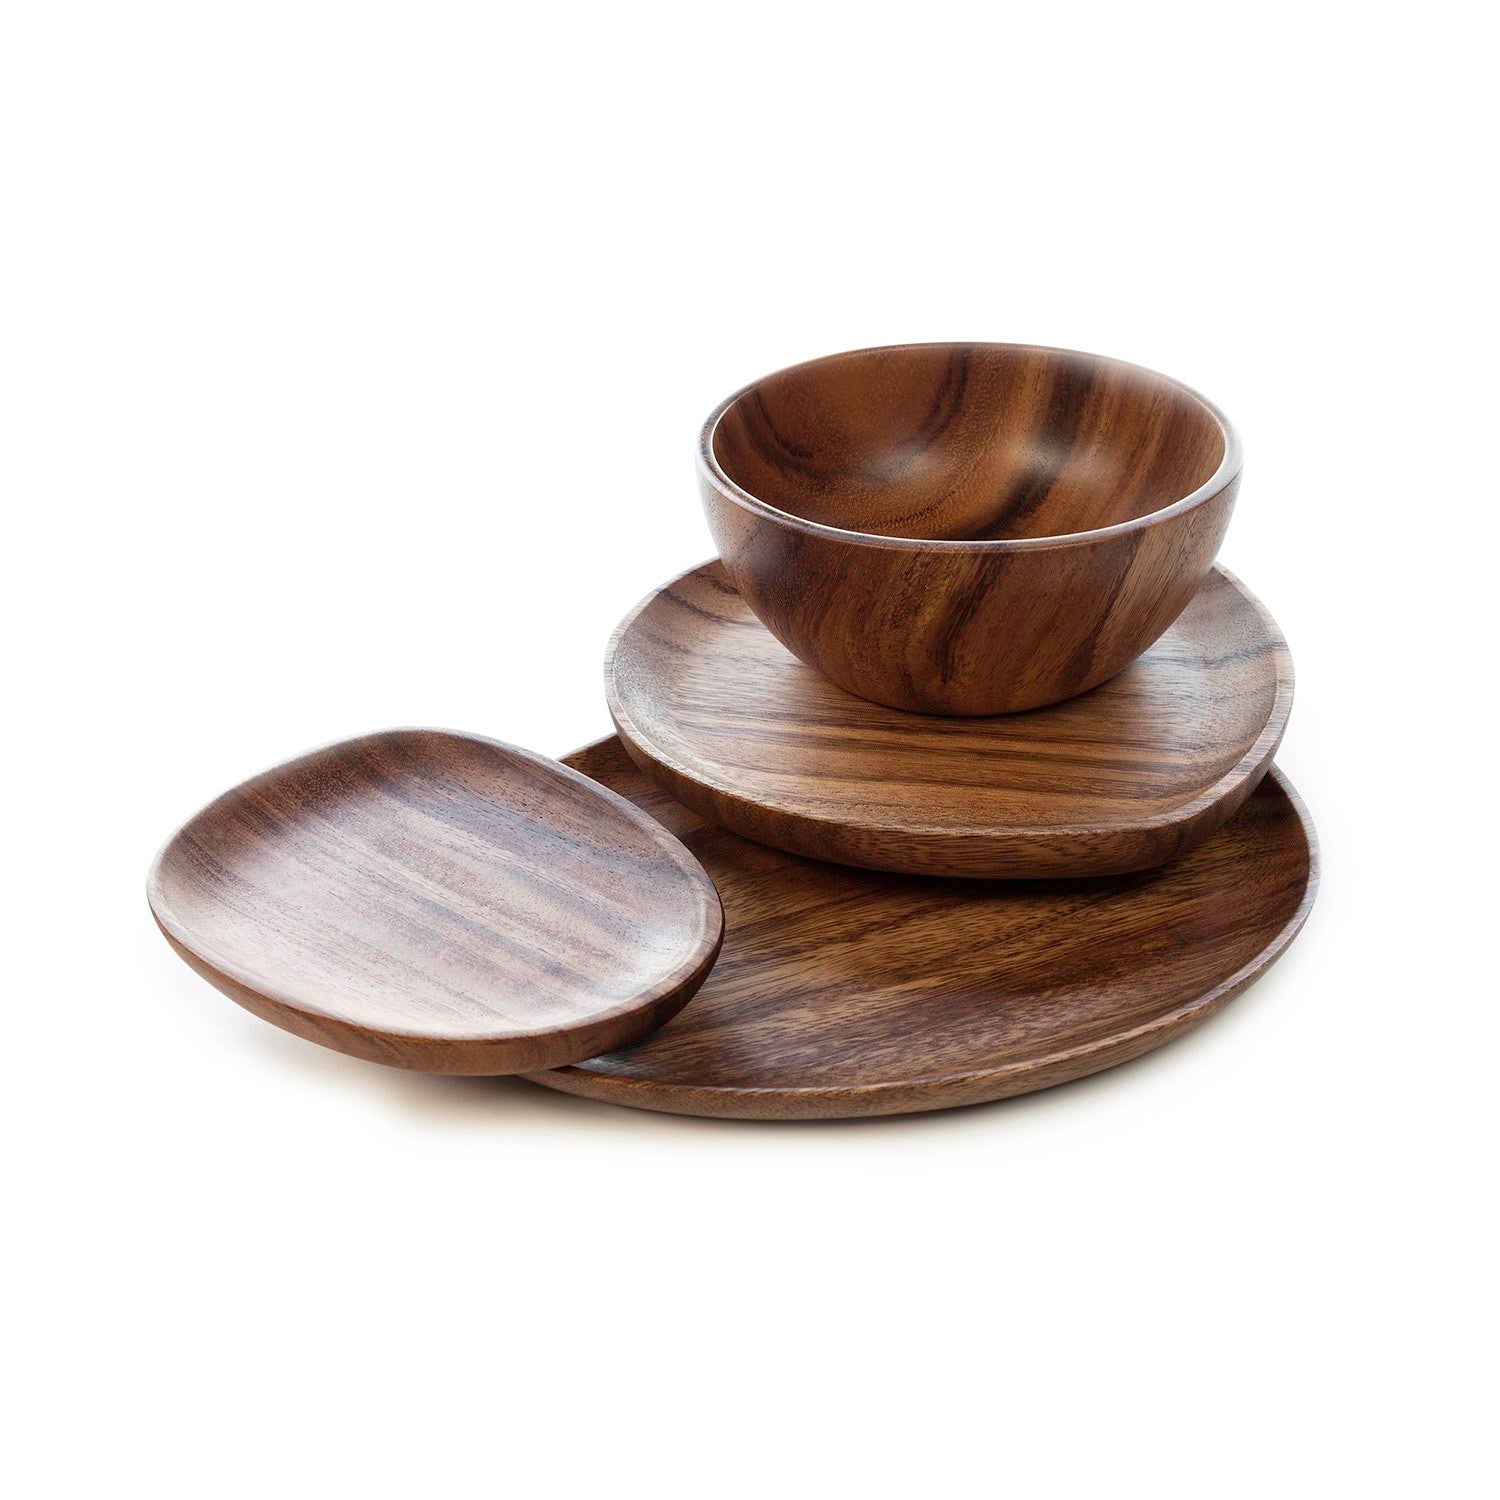 Wooden plate set stacked